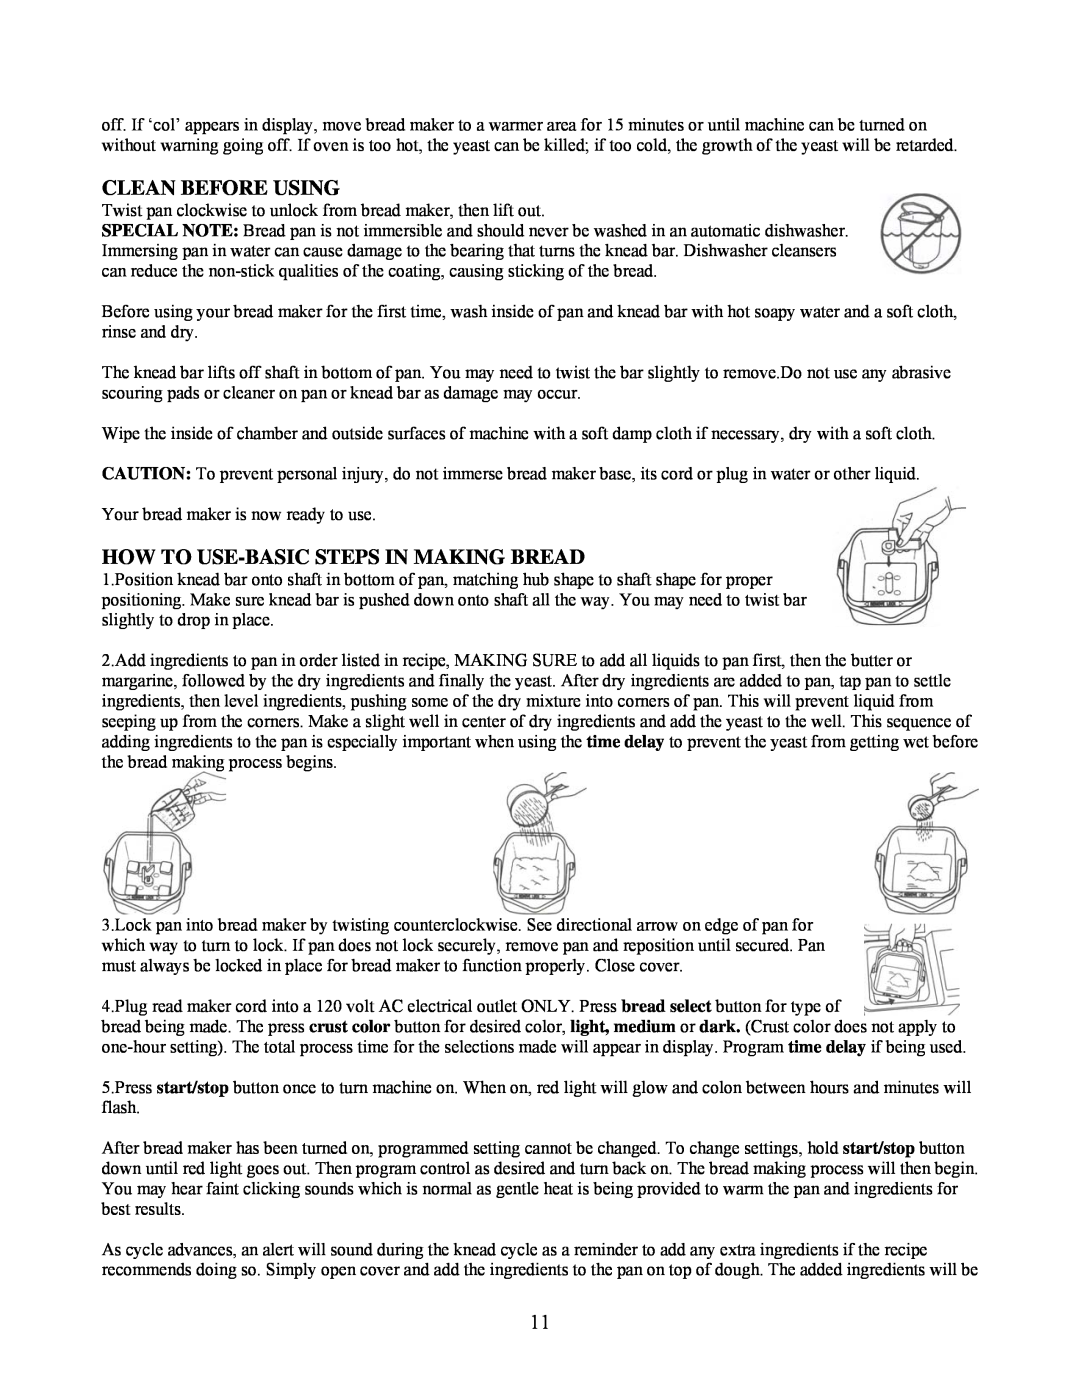 West Bend L5141 manual Clean Before Using, How To Use-Basic Steps In Making Bread 